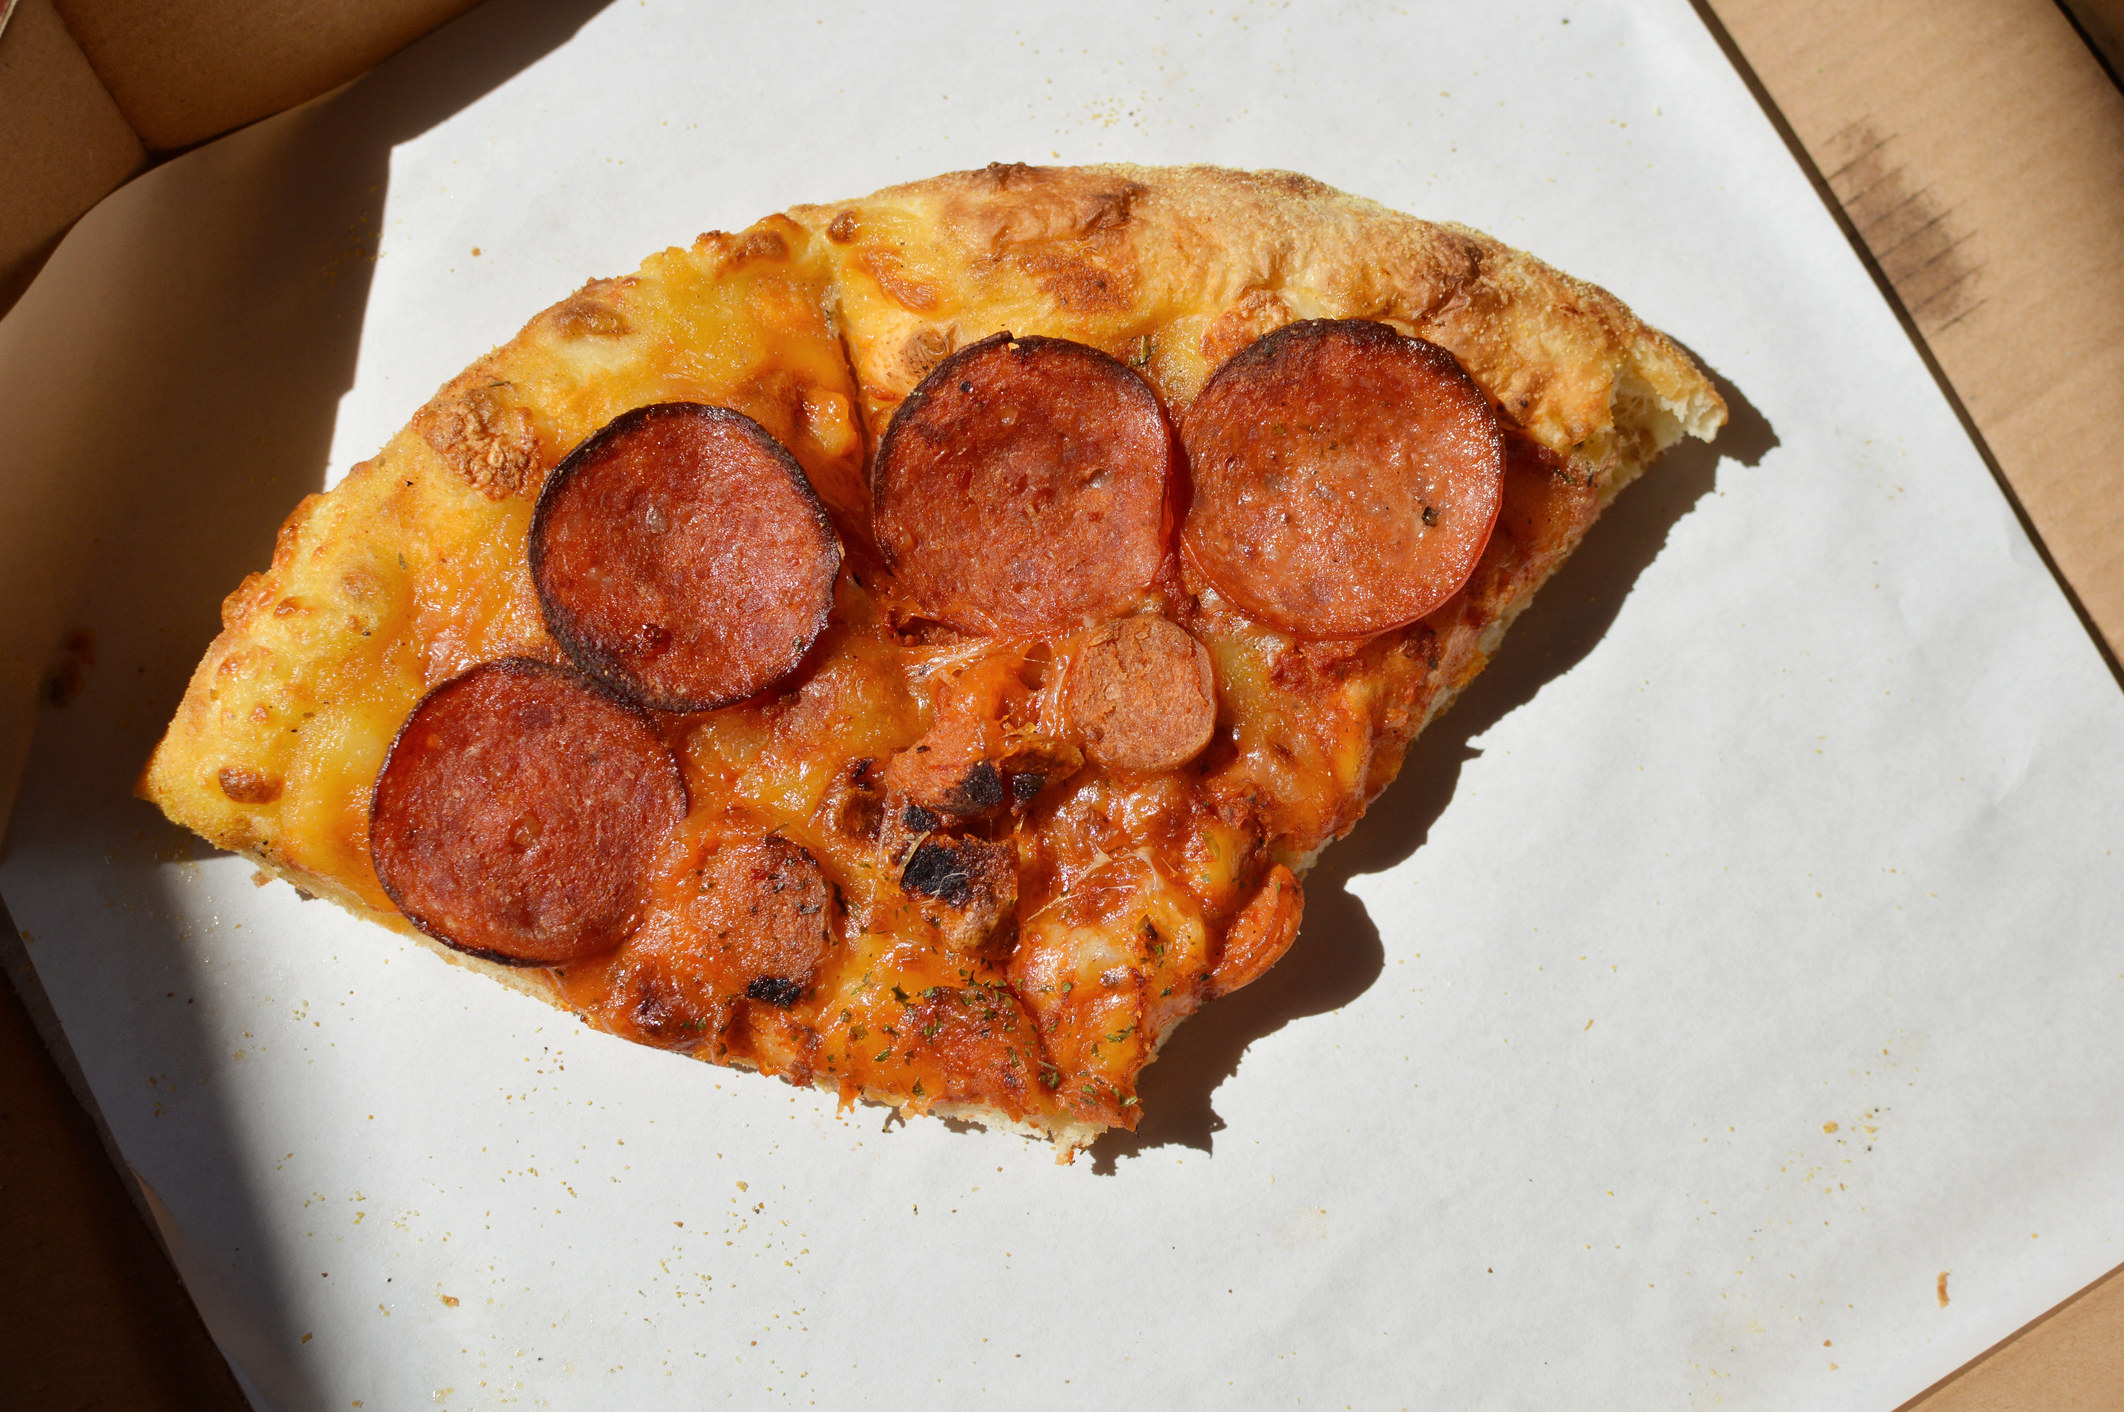 Two pepperoni pizza slices inside a pizza box.